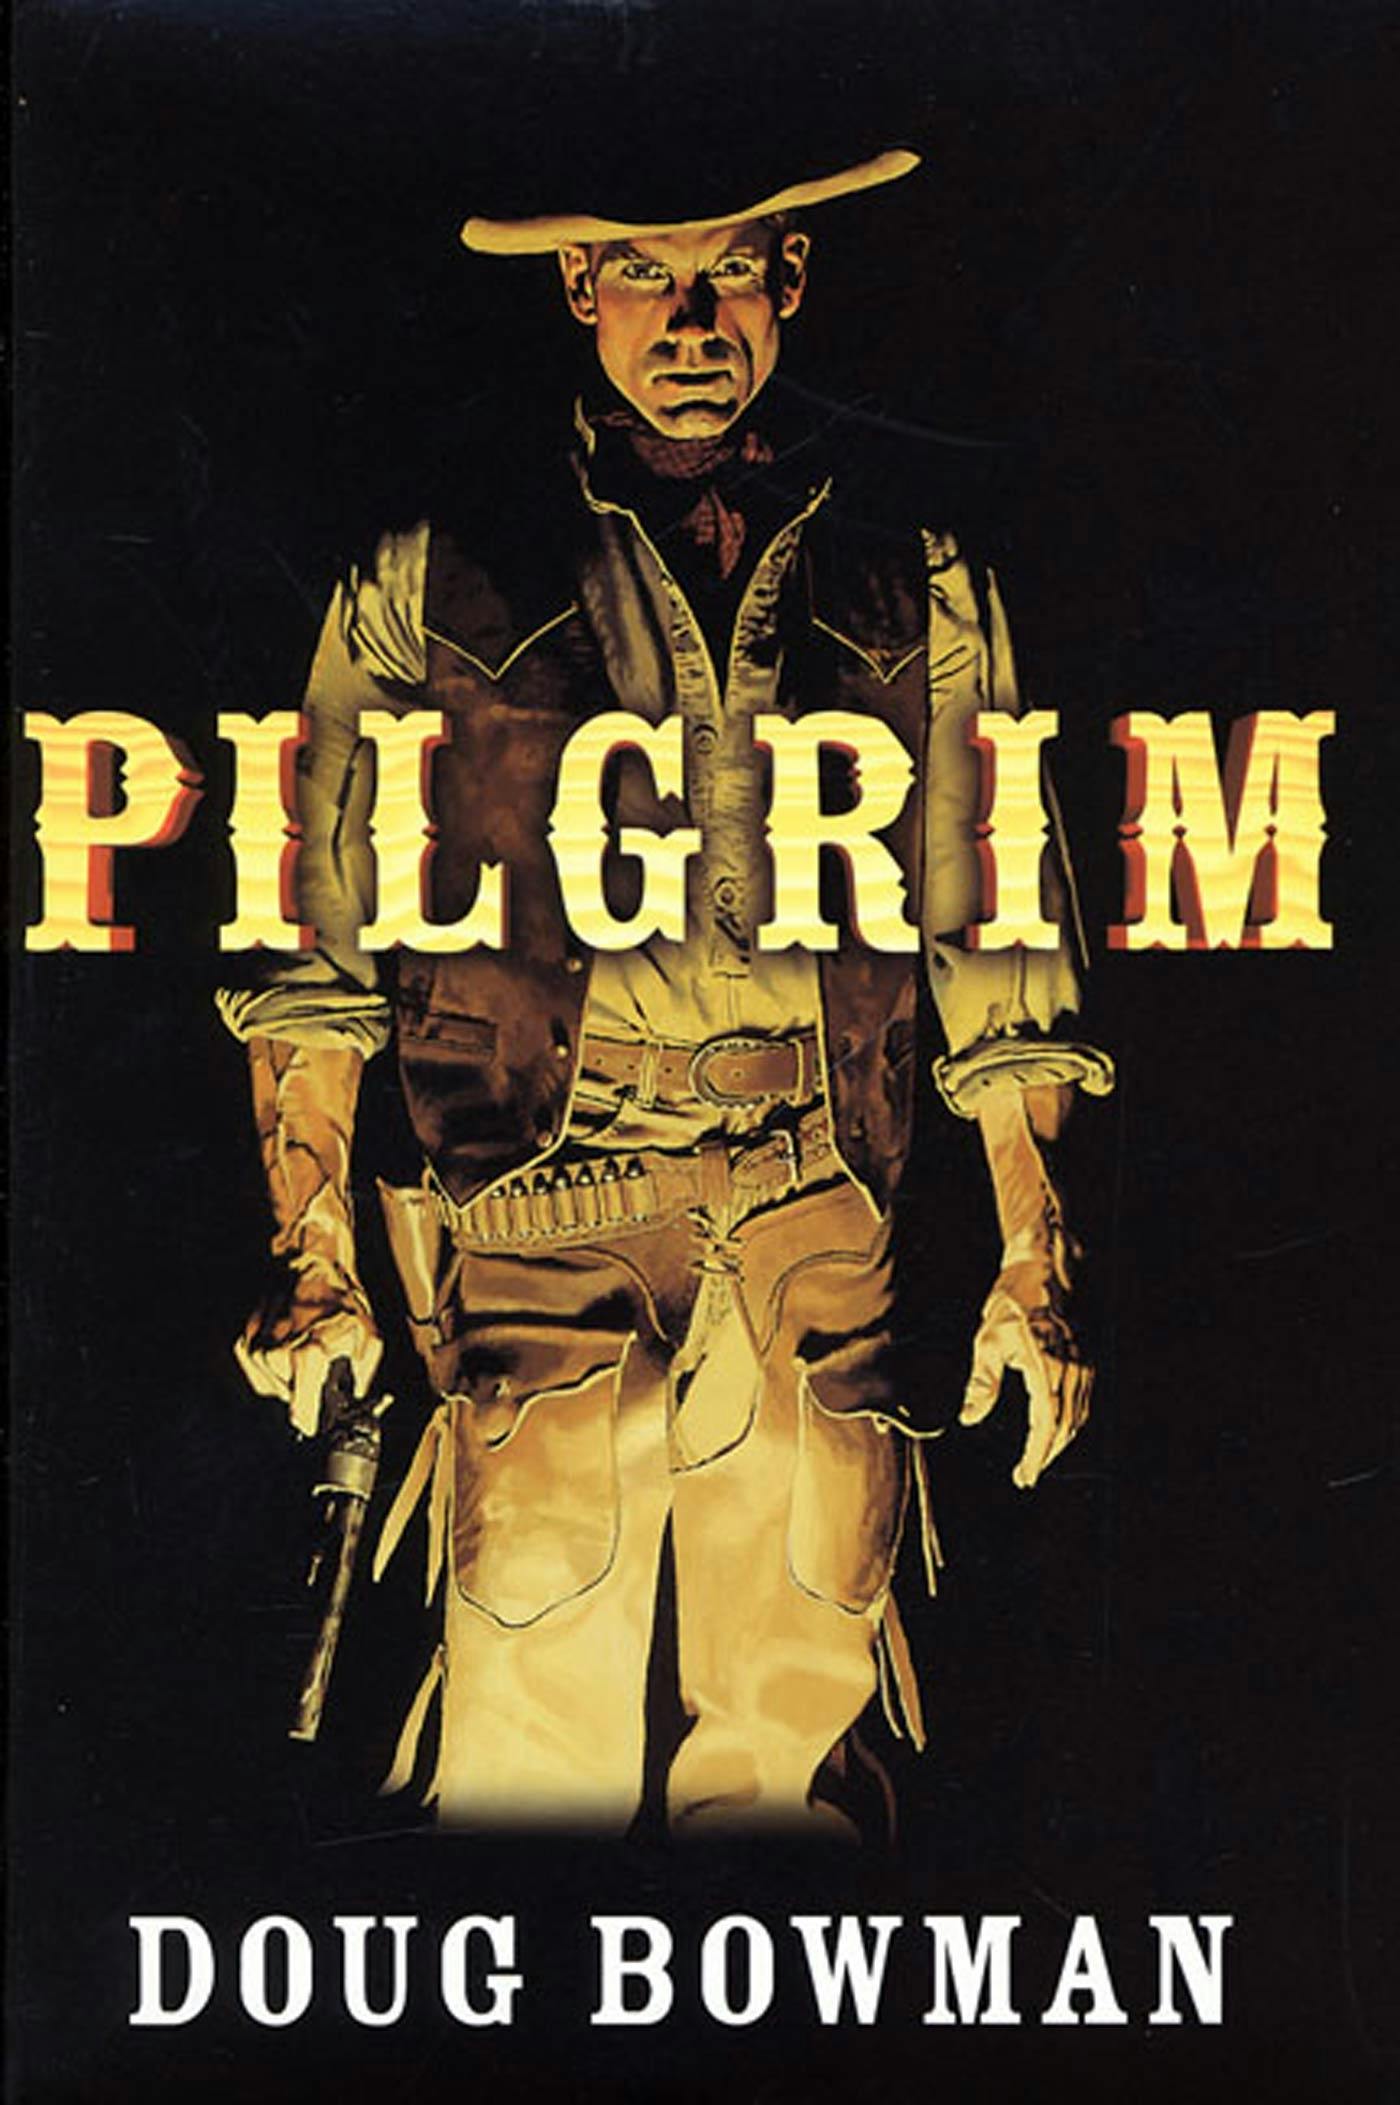 Cover for the book titled as: Pilgrim